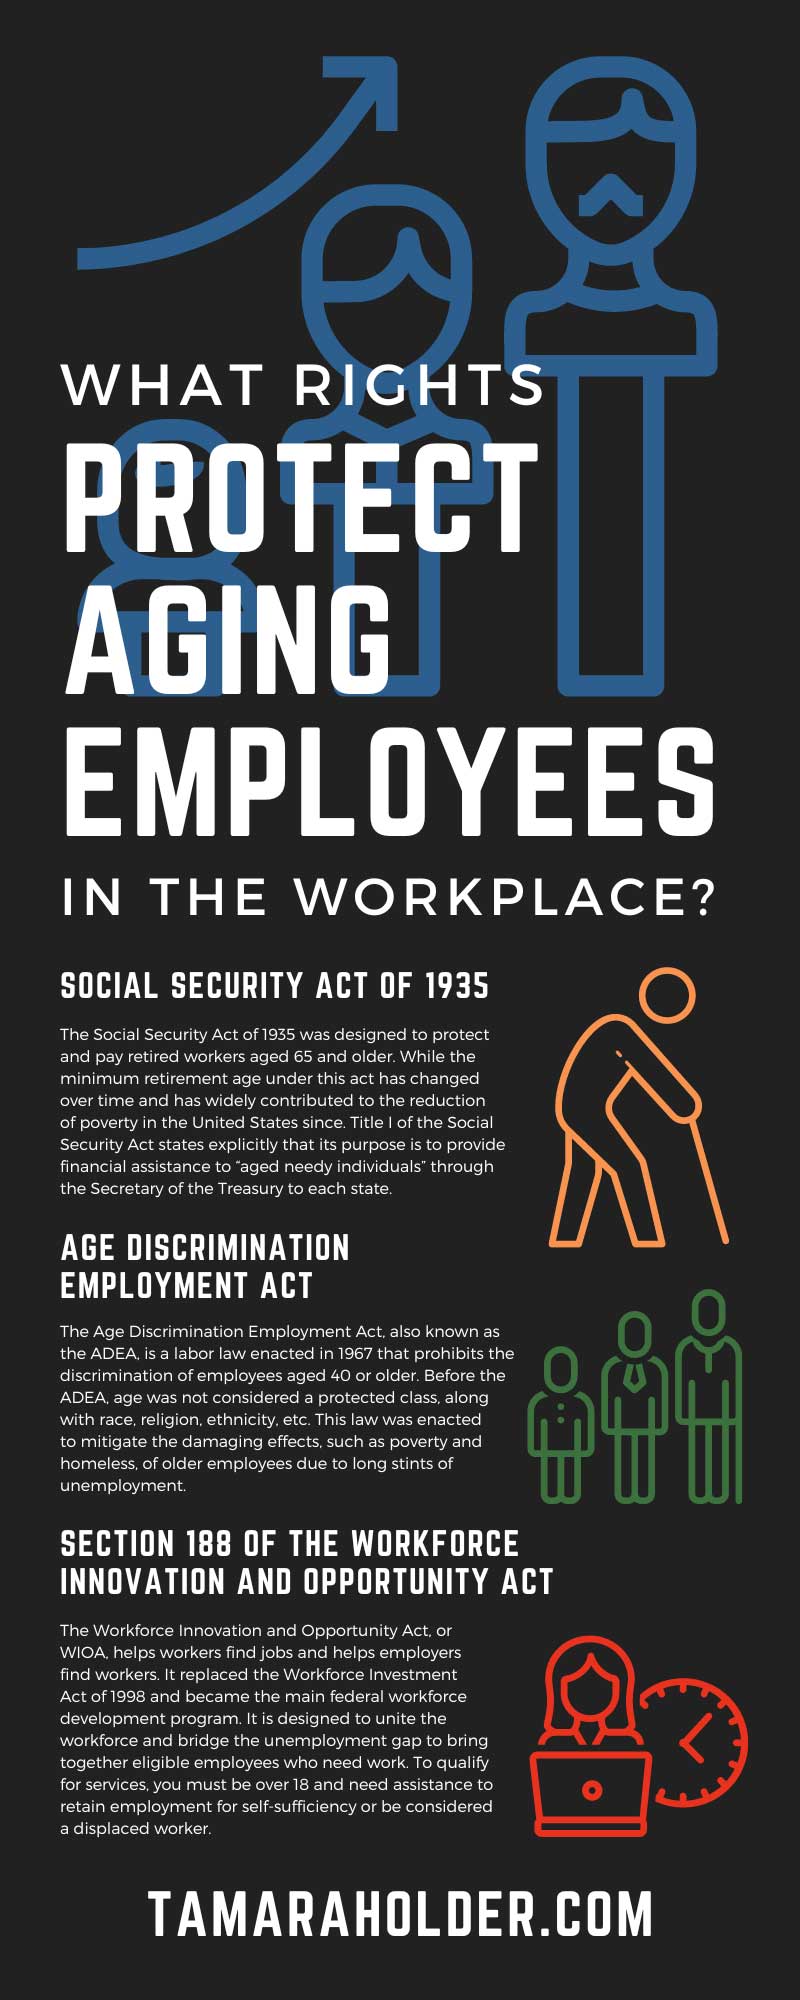 What Rights Protect Aging Employees in the Workplace?